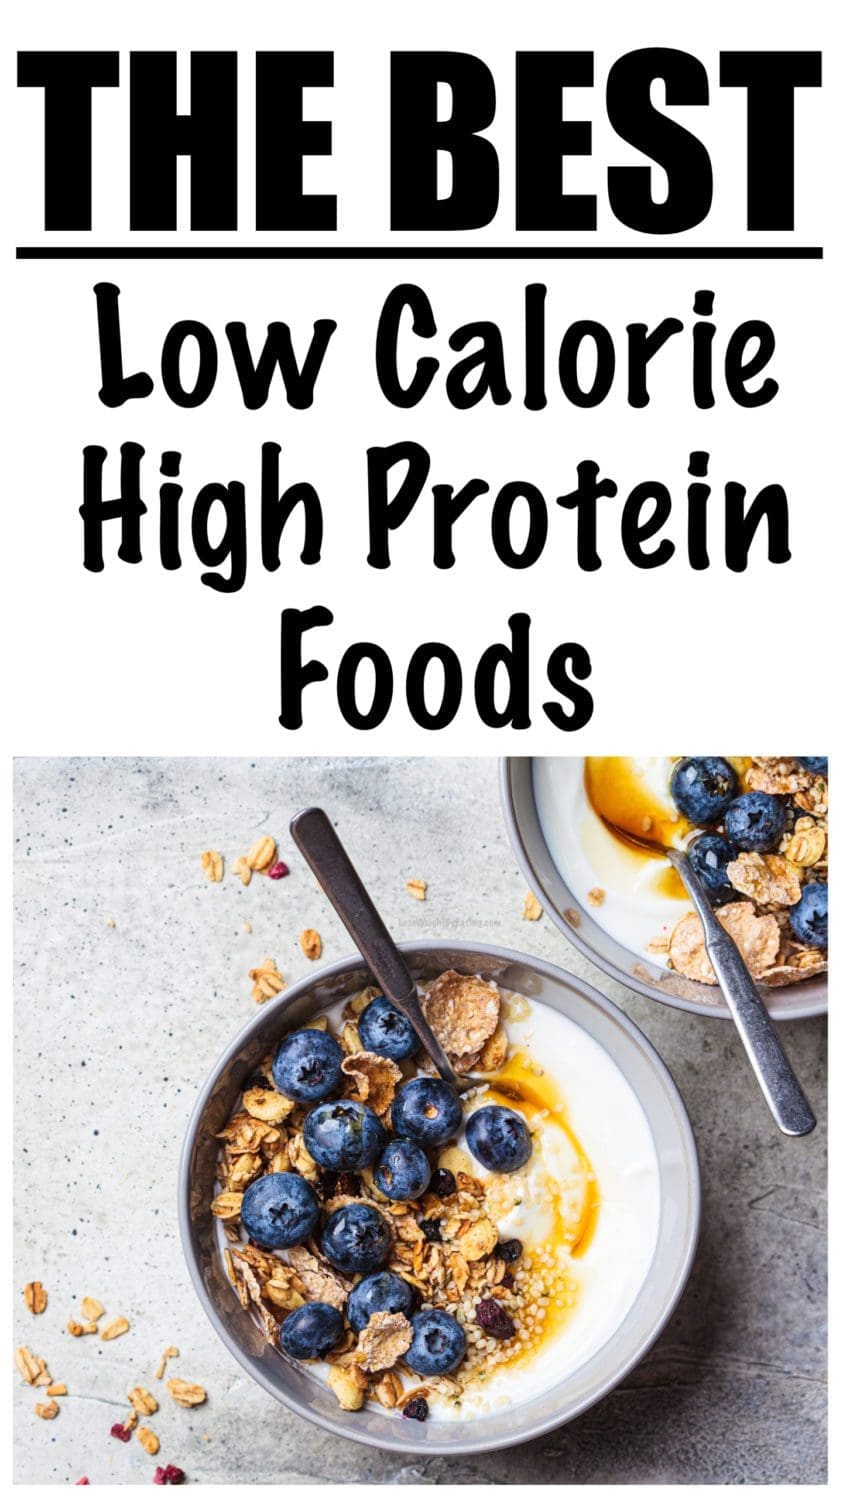 10 BEST Low Calorie High Protein Foods